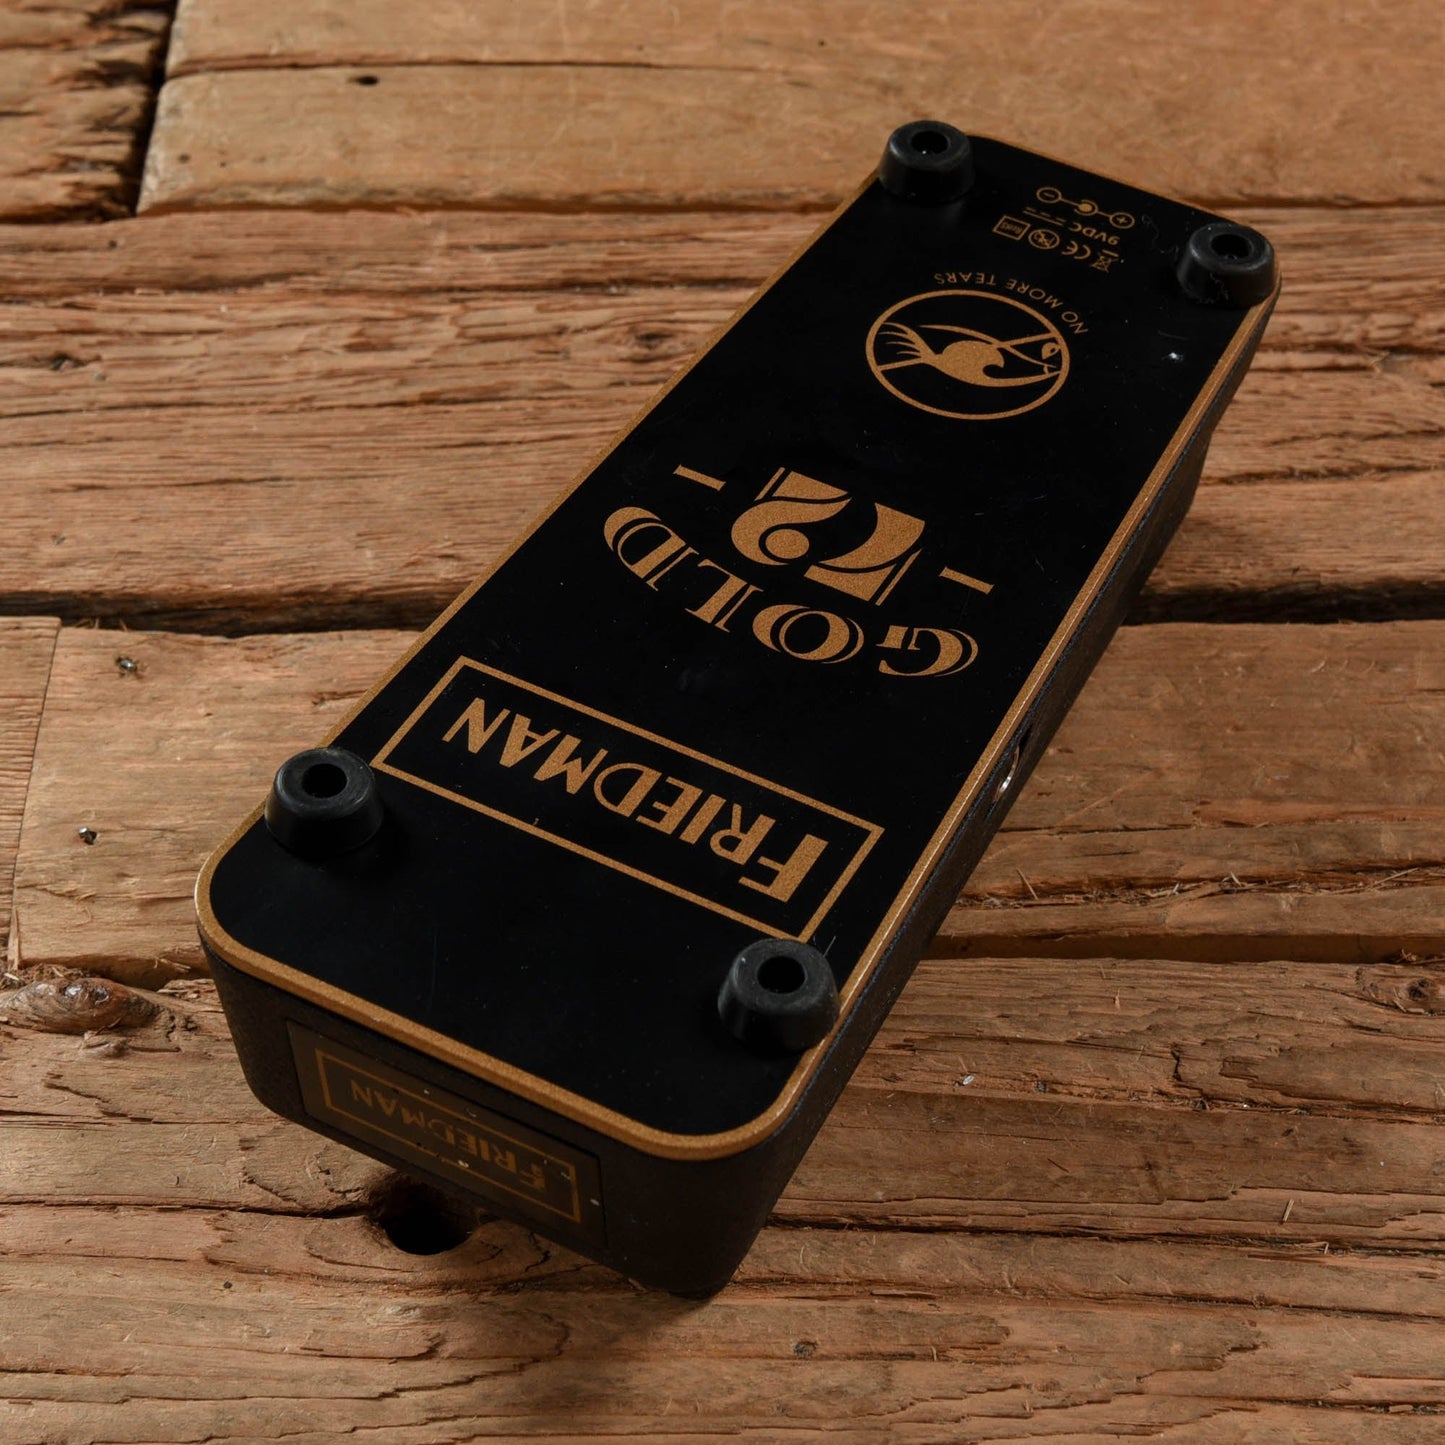 Friedman Gold 72 Wah Effects and Pedals / Wahs and Filters